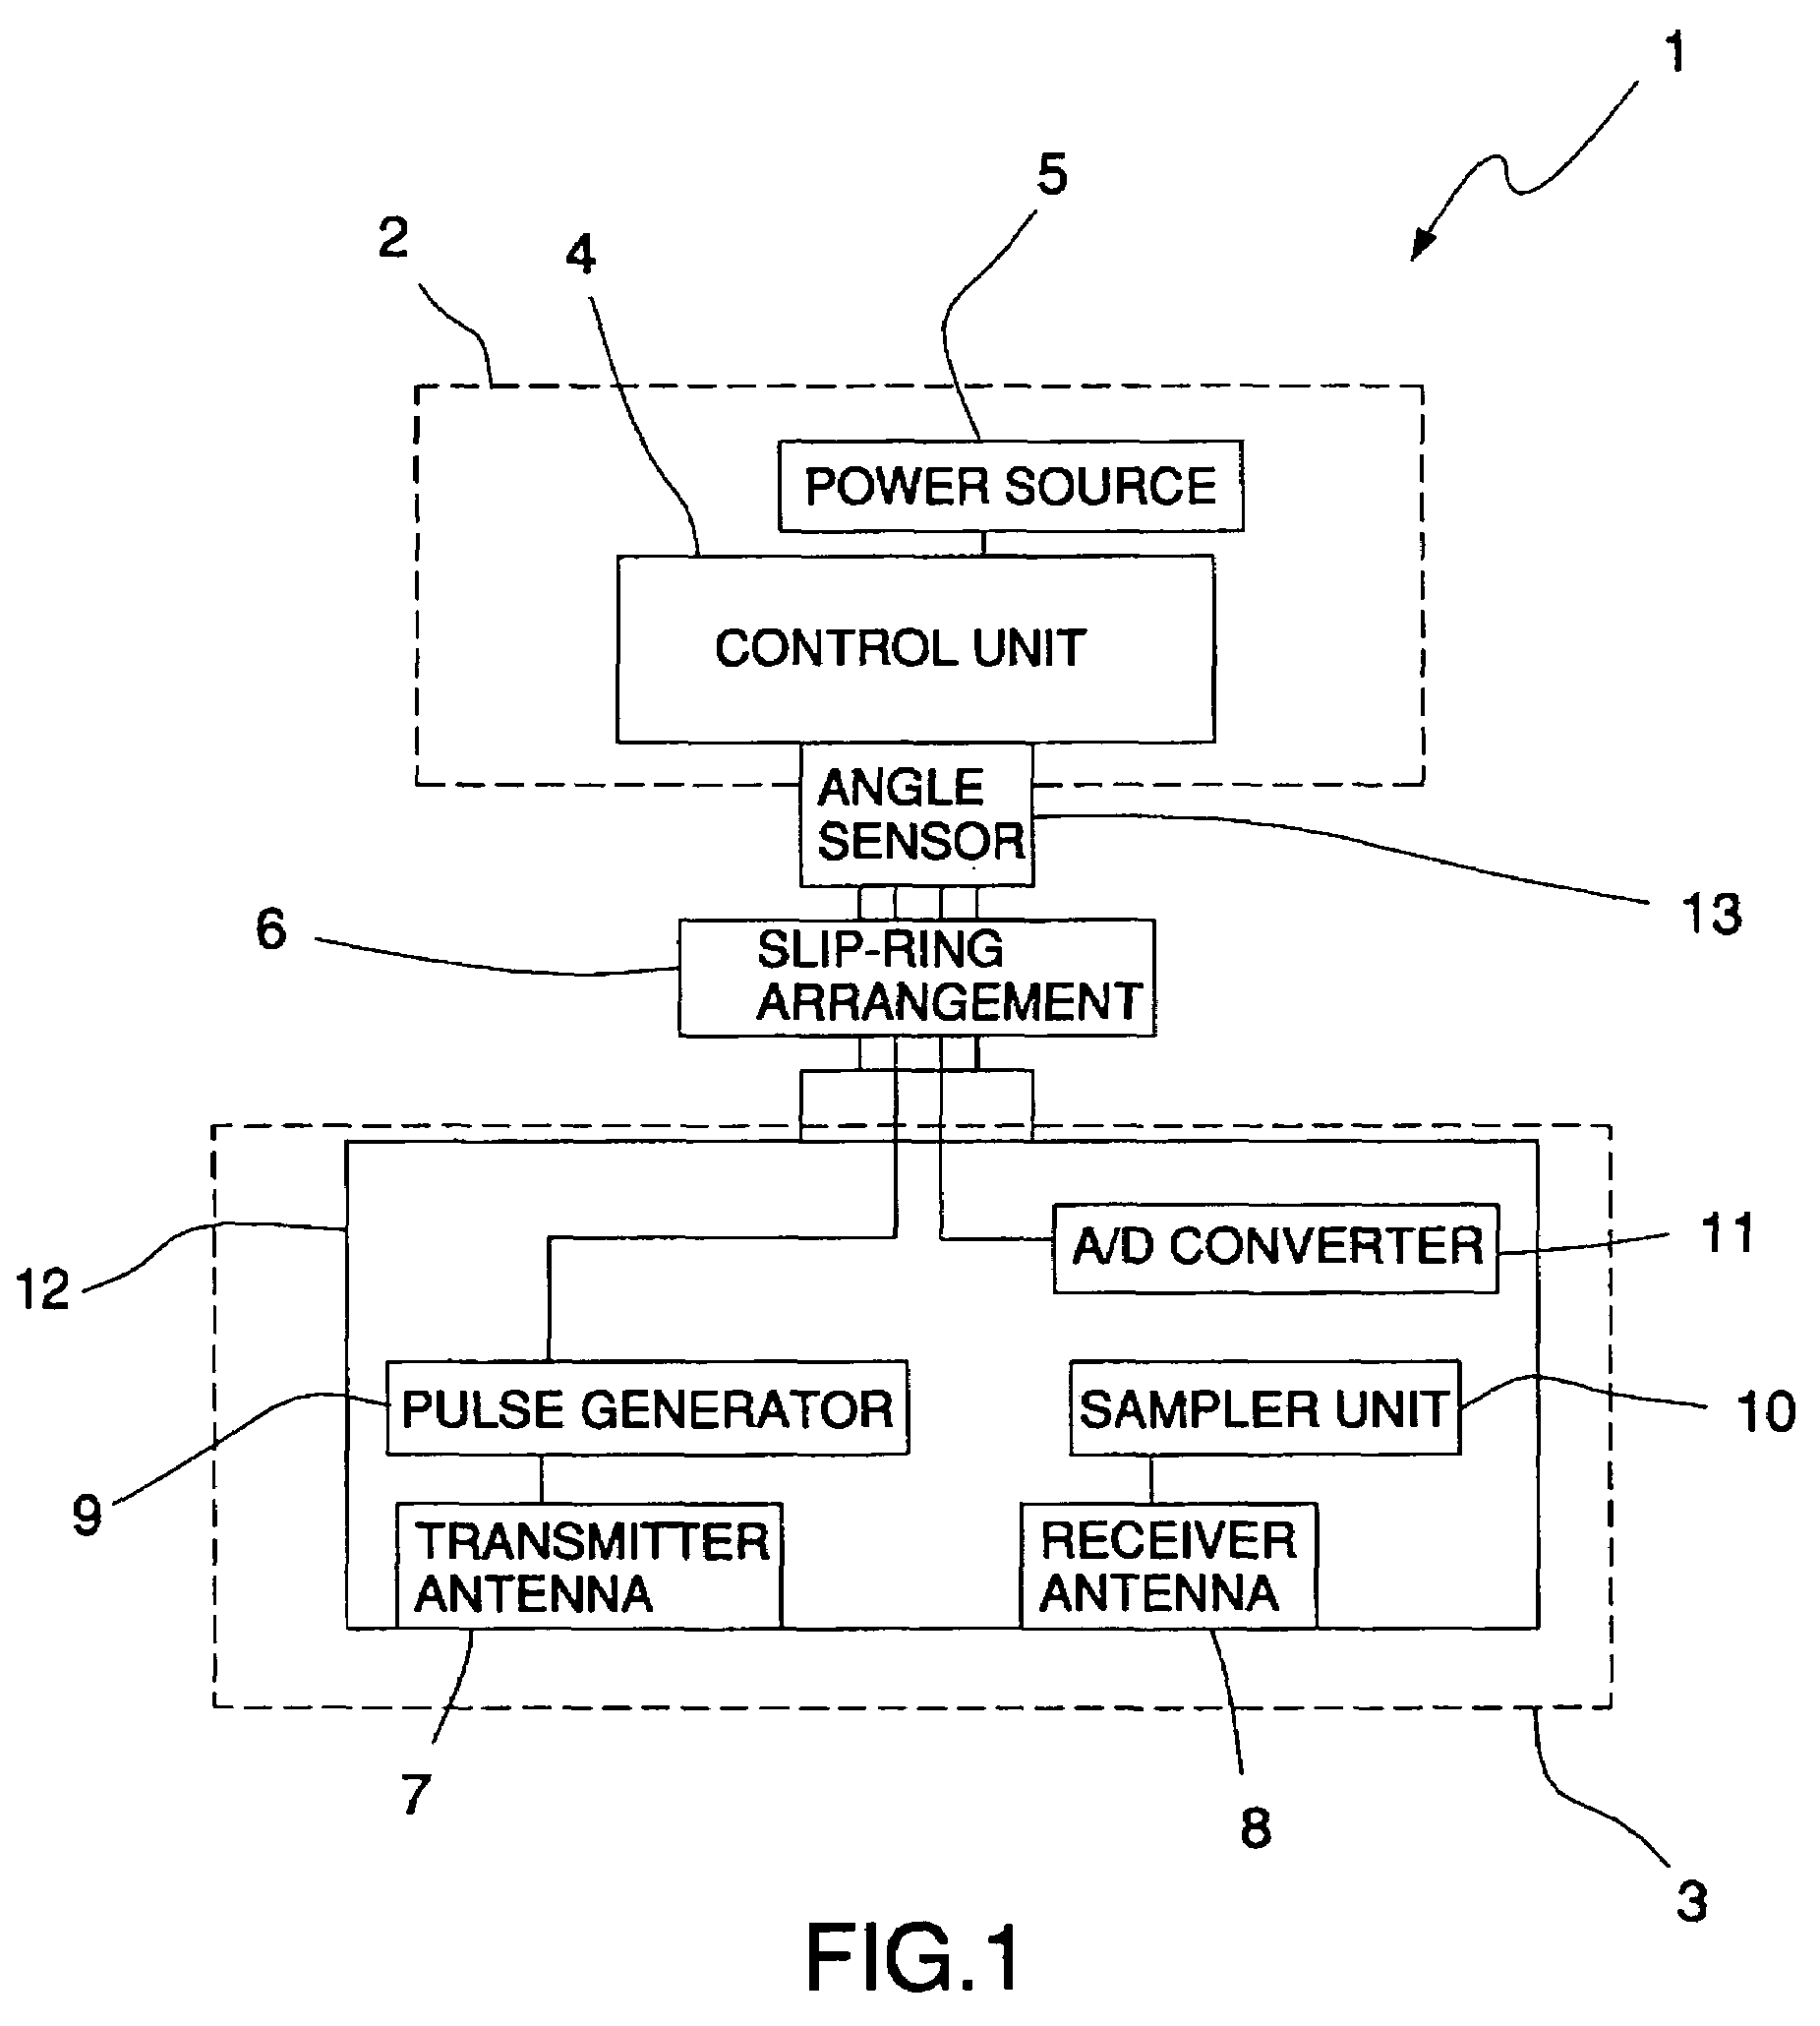 Apparatus for collecting ground radar data with polarization information